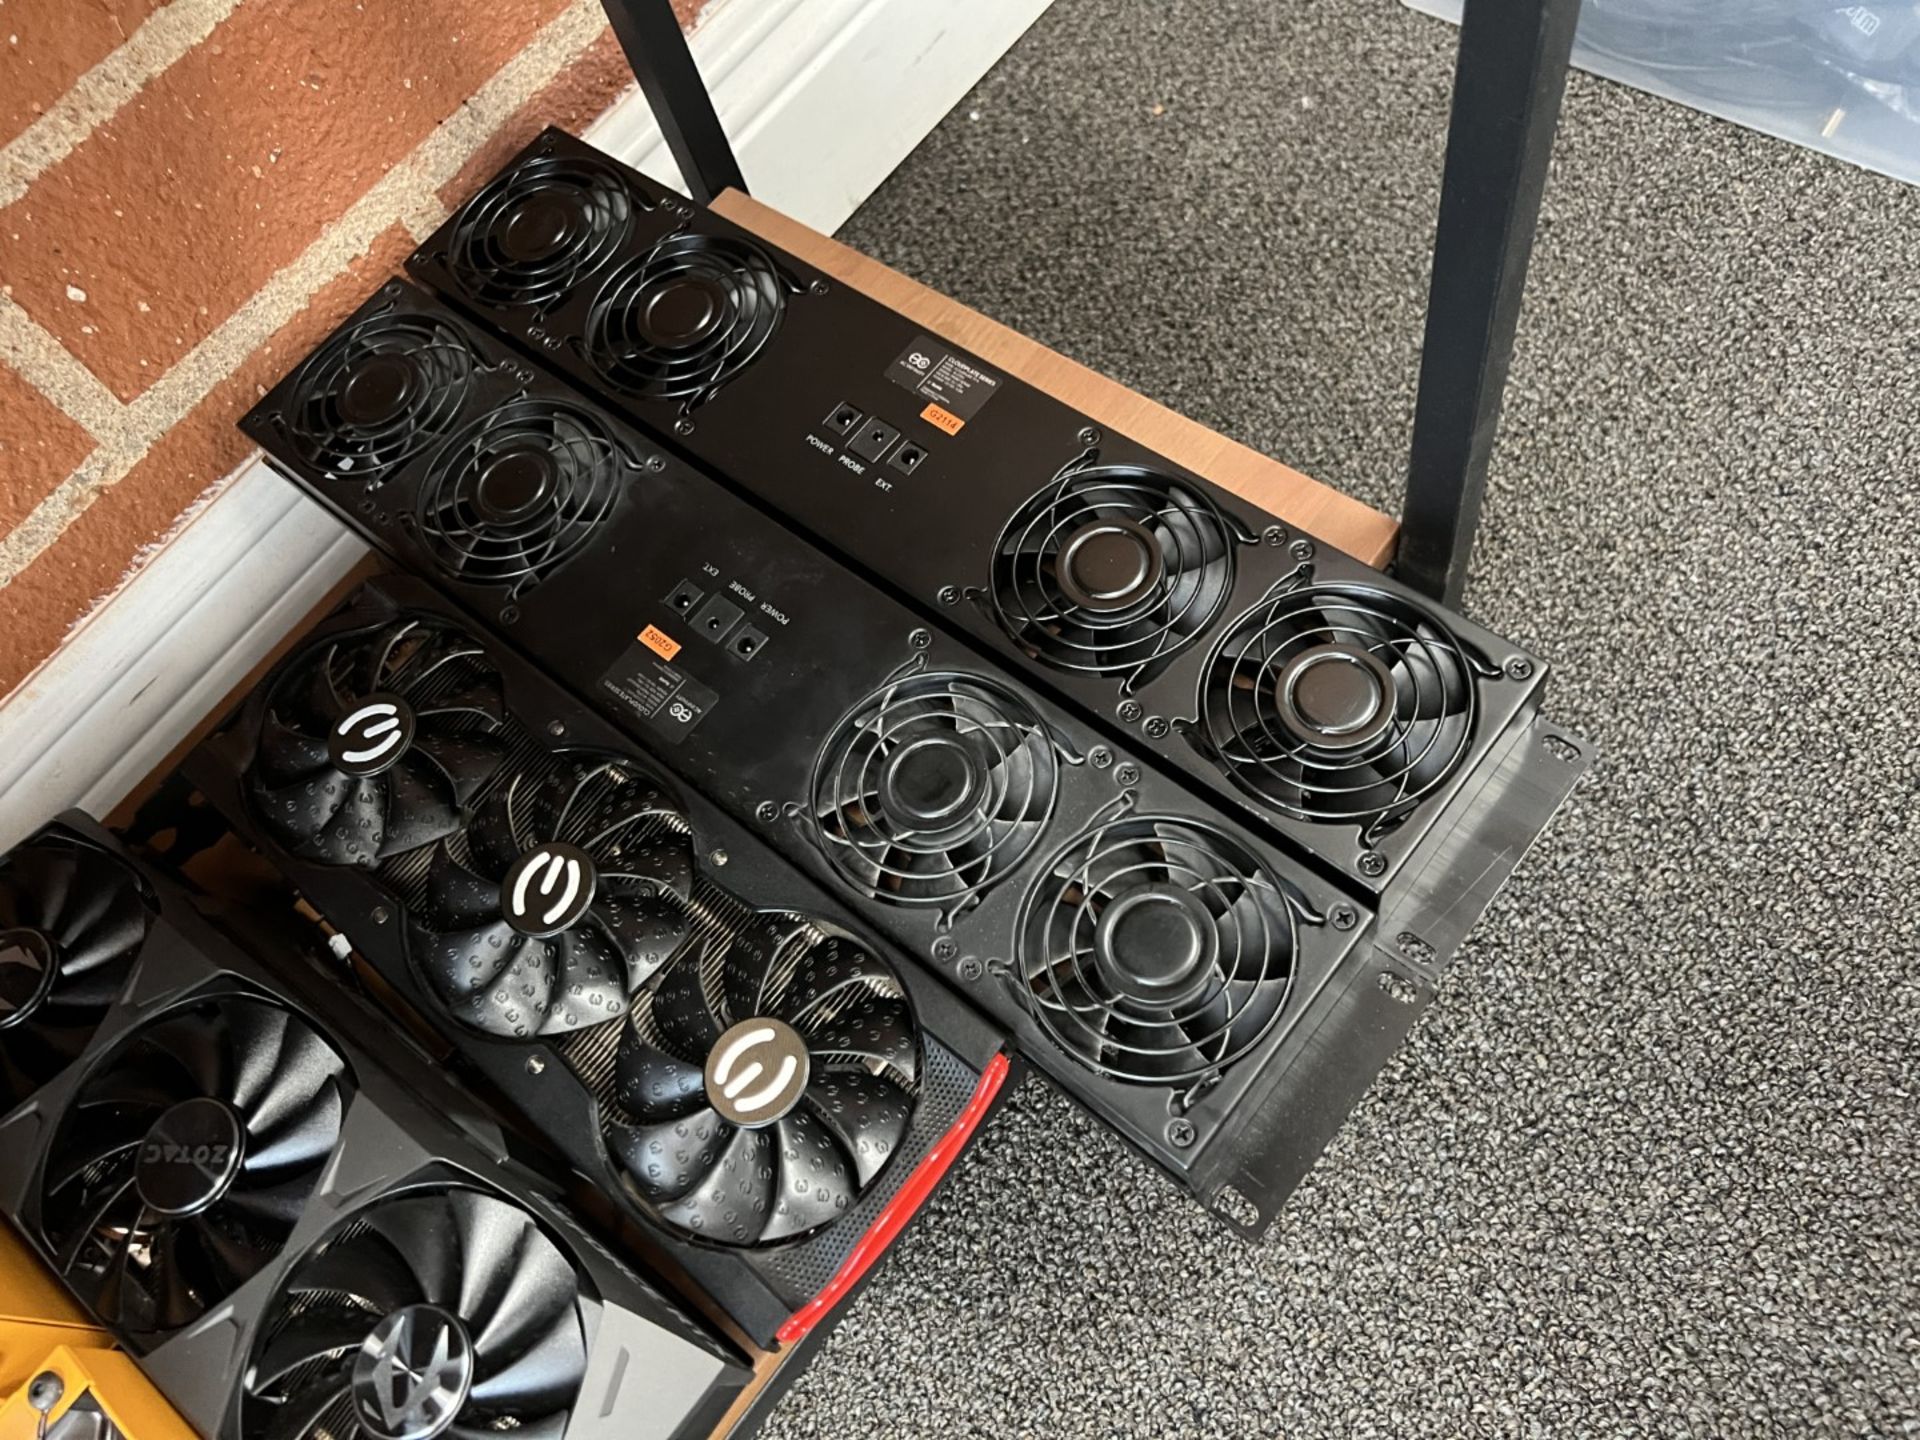 Gaming and Computer Cooling Fans - Image 2 of 10